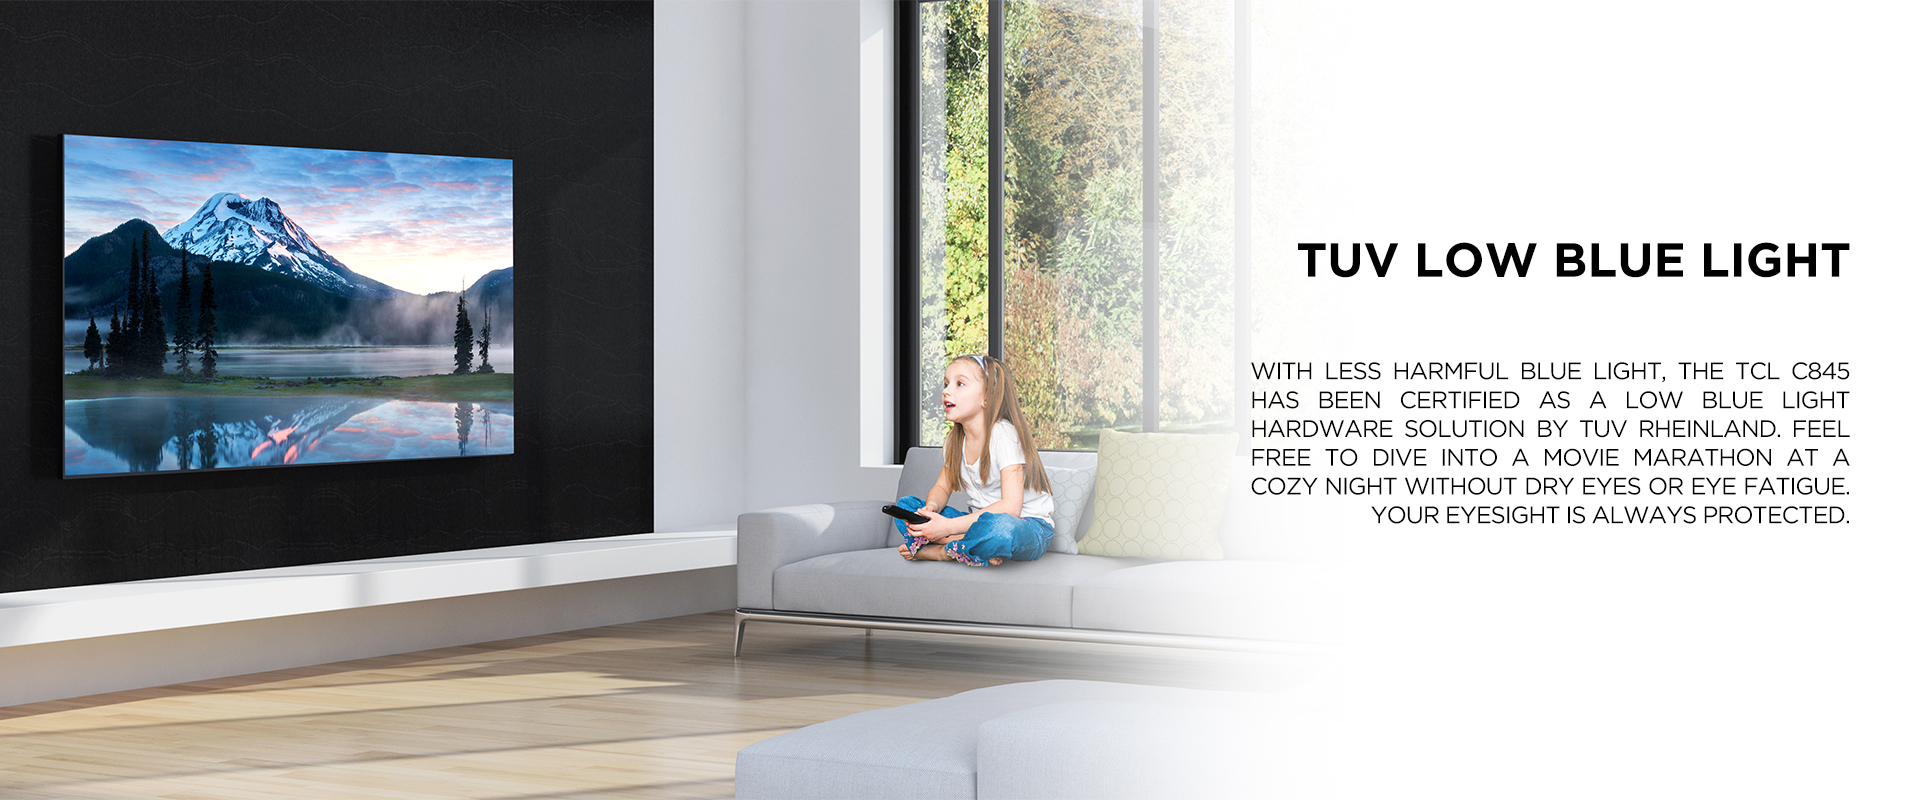 TUV Low Blue Light
 - With less harmful blue light, the TCL C845 has been certified as a low blue light hardware solution by TUV Rheinland. Feel free to dive into a movie marathon at a cozy night without dry eyes or eye fatigue. Your eyesight is always protected.